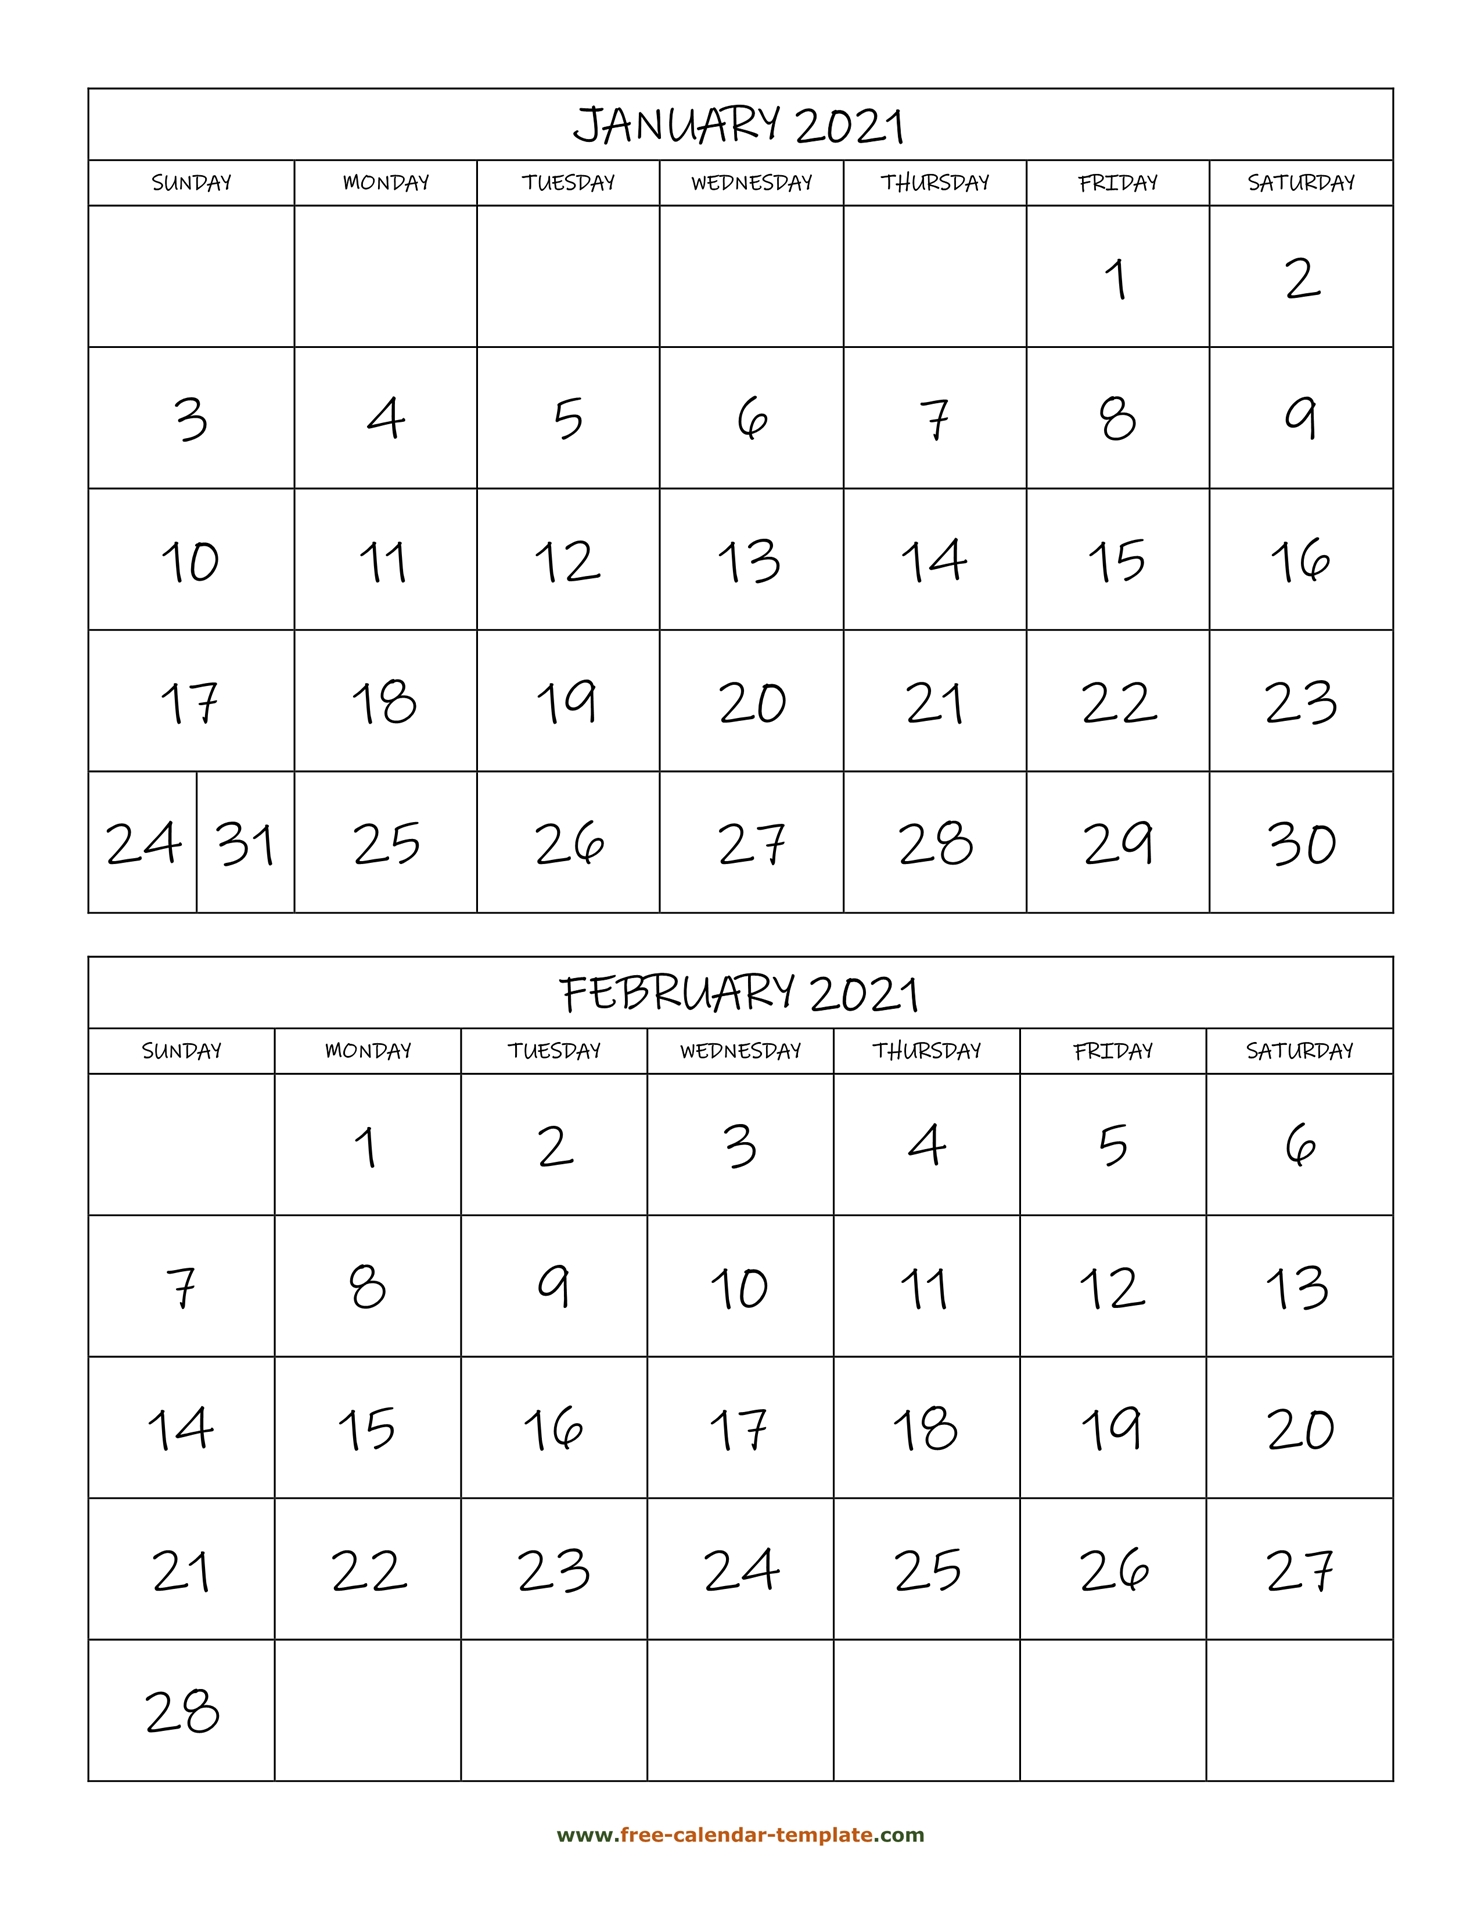 Printable Calendar 2 Months Per Page 2022 Monthly Calendar 2021, 2 Months Per Page (Vertical) | Free-Calendar-Template .Com